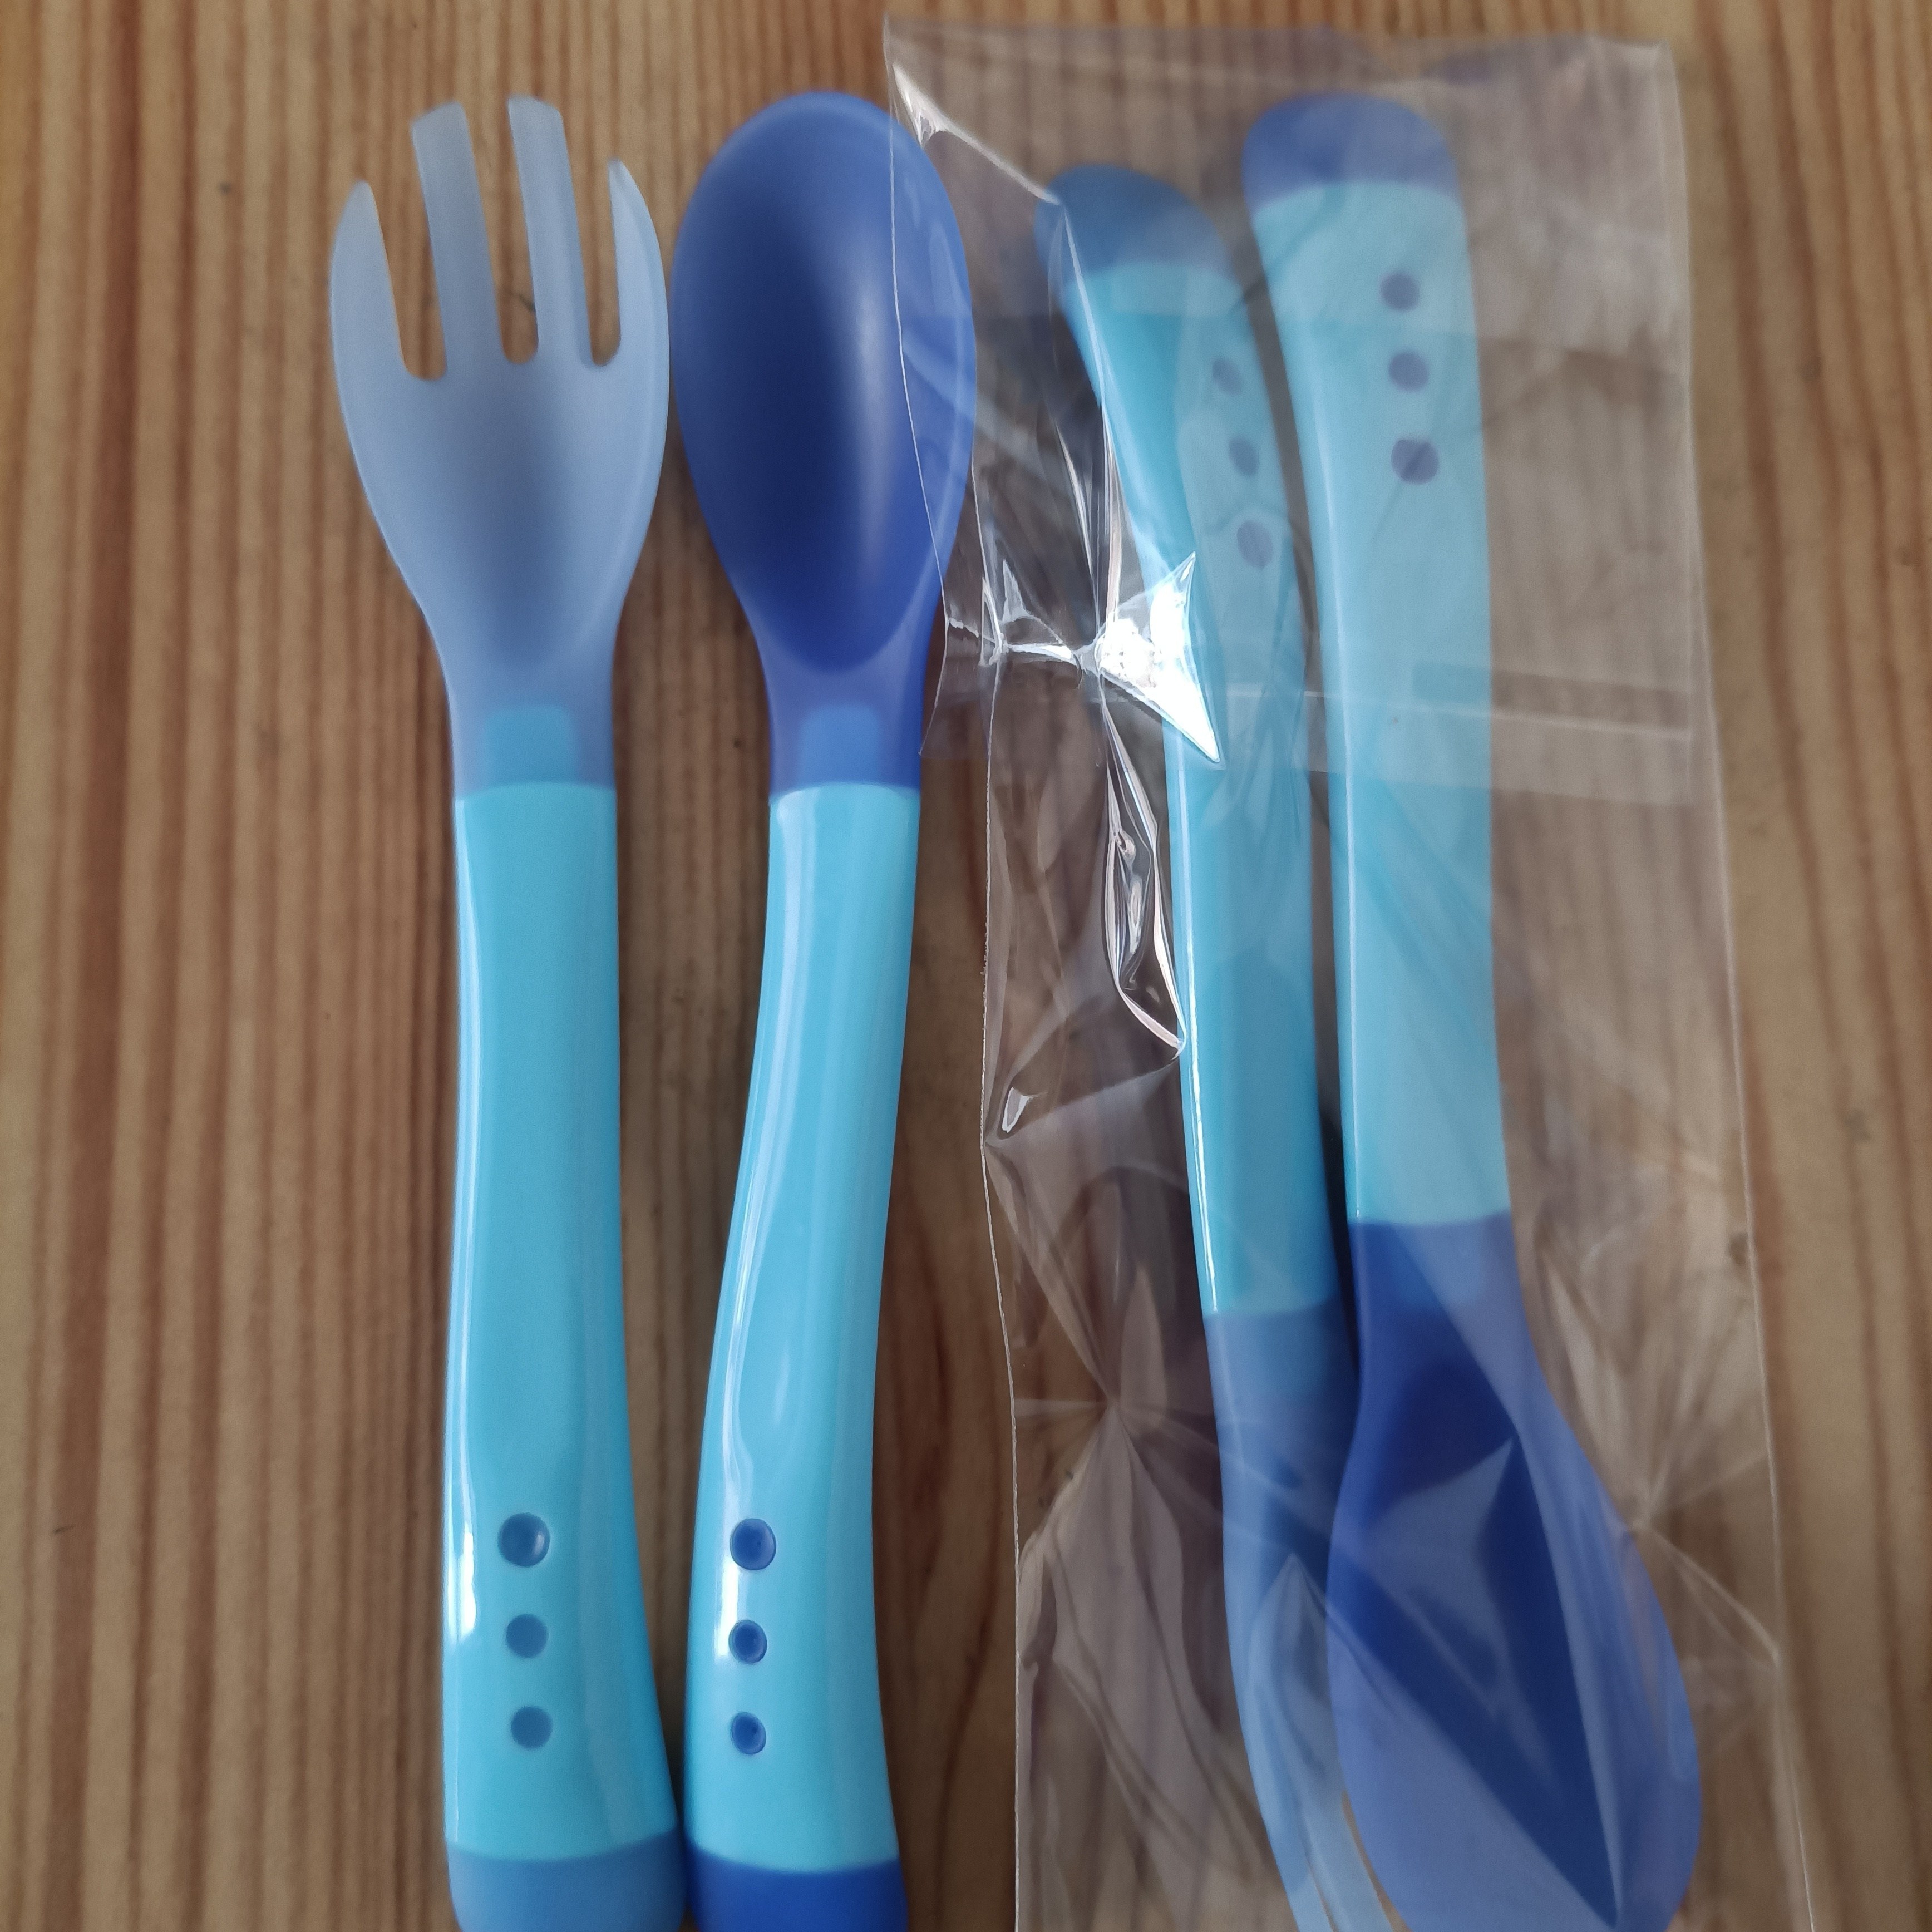 Baby Spoons And Forks Feeding Set, Soft Silicone Tip Heat